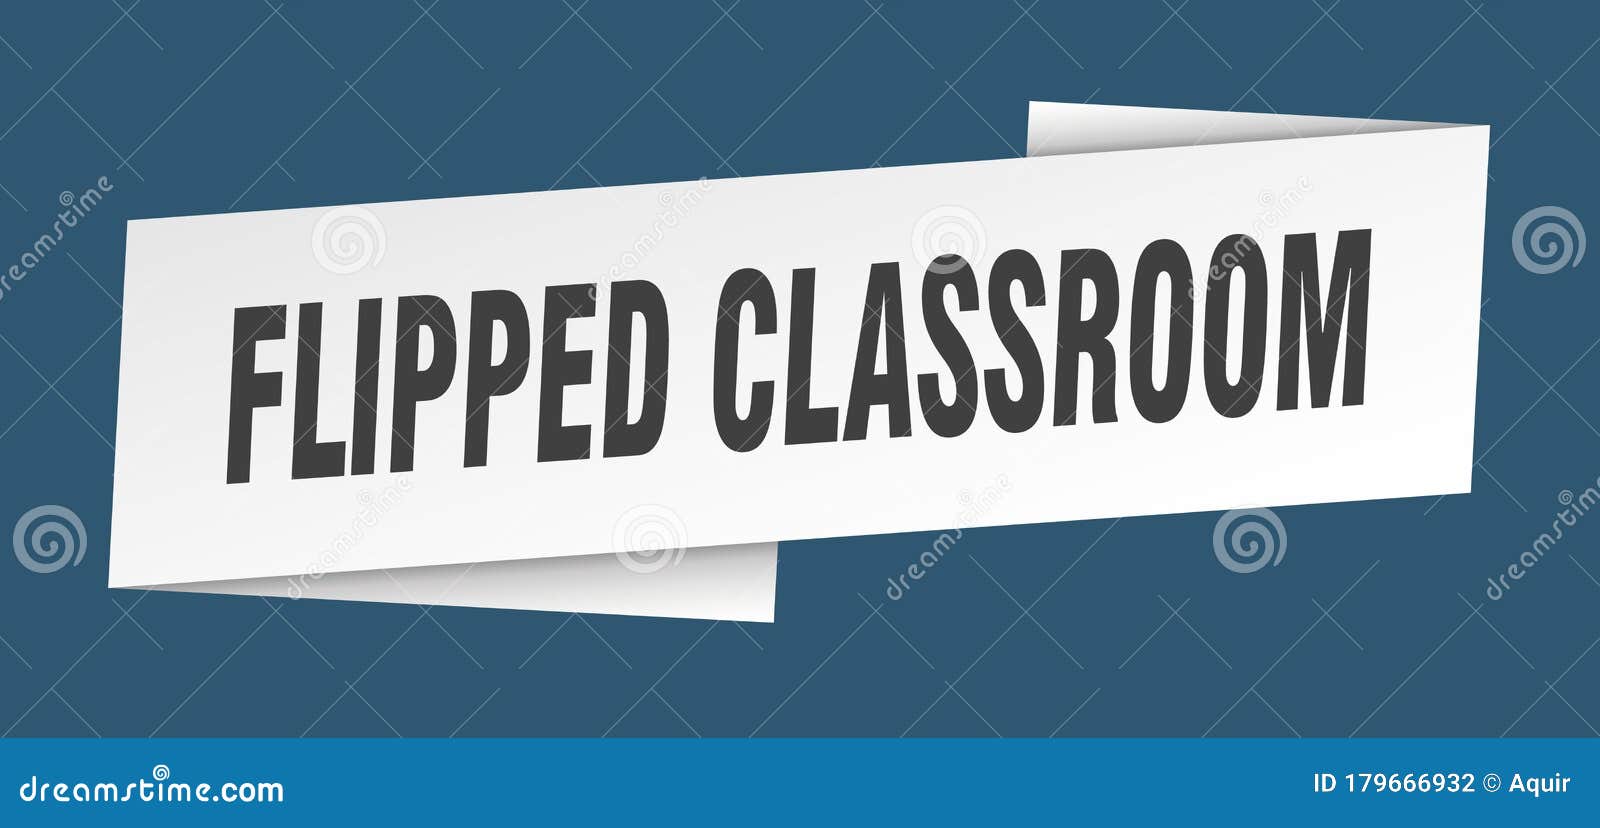 Flipped Classroom Banner Template. Flipped Classroom Ribbon Label Within Classroom Banner Template